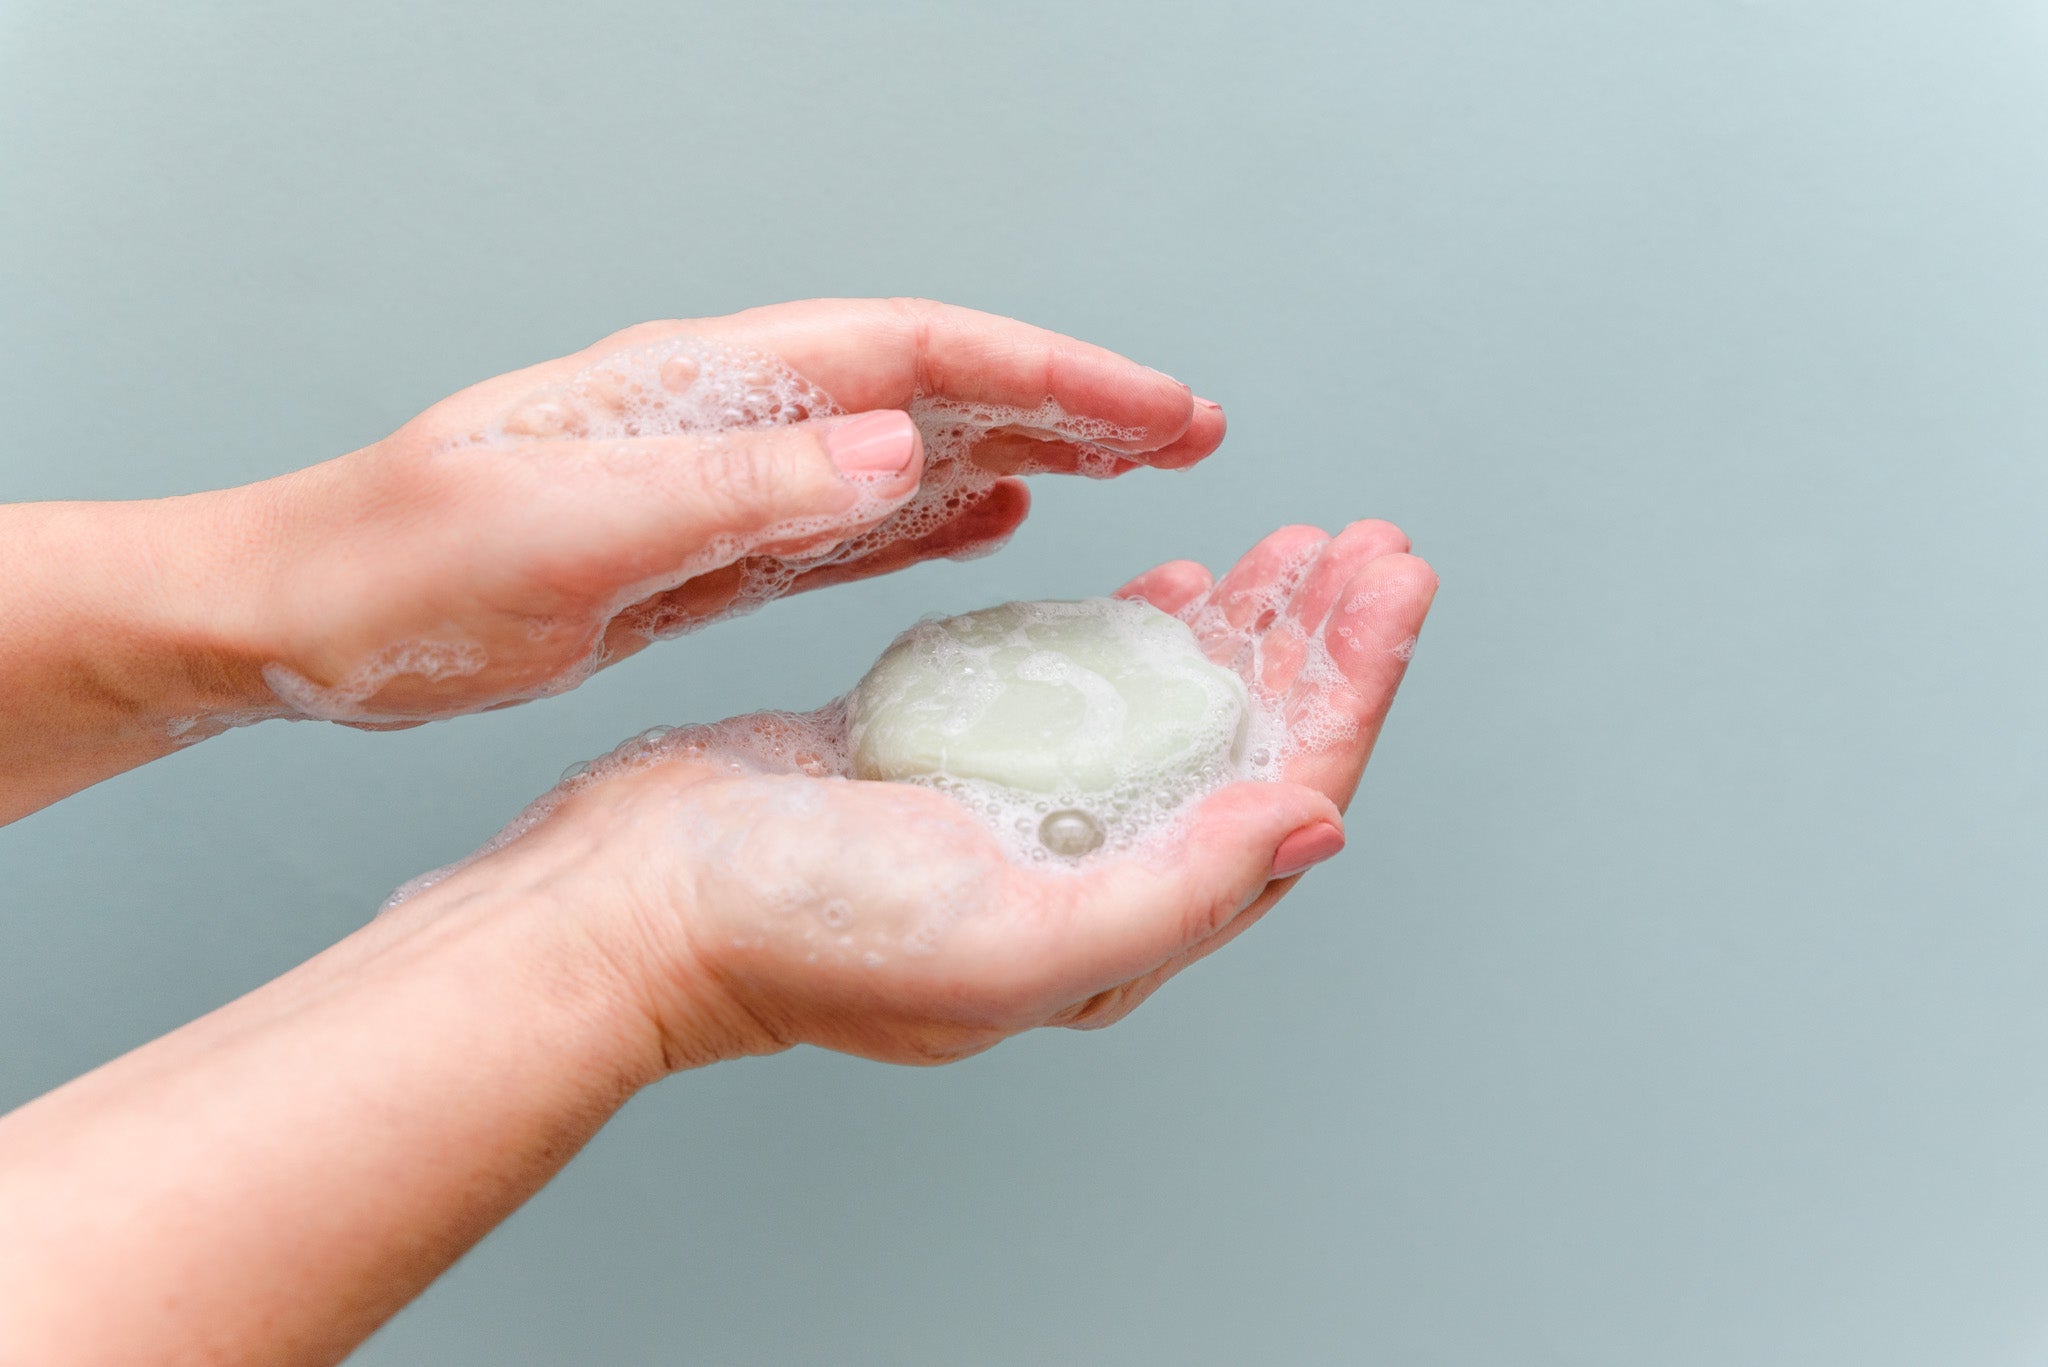 solid shampoo lather in hands